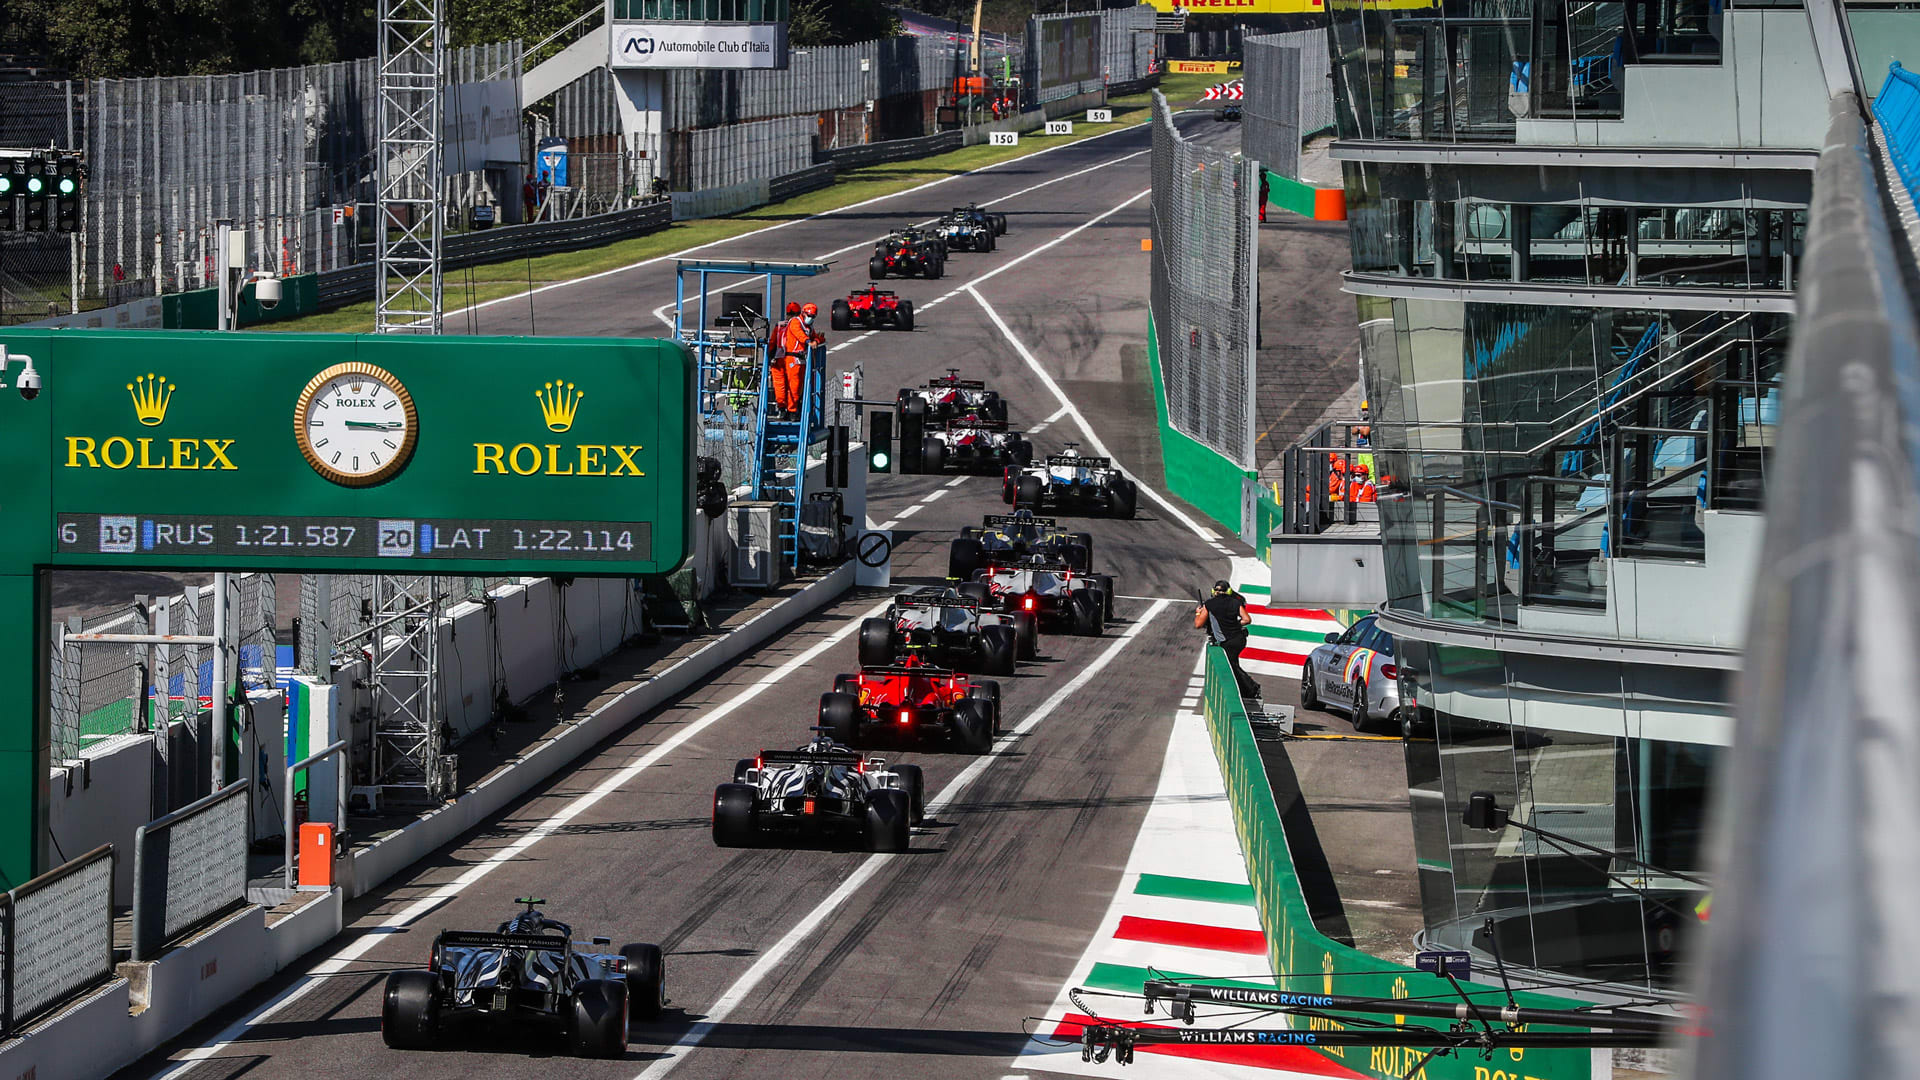 What time is the 2021 Italian Grand Prix and F1 Sprint, and how can I watch them? Formula 1®